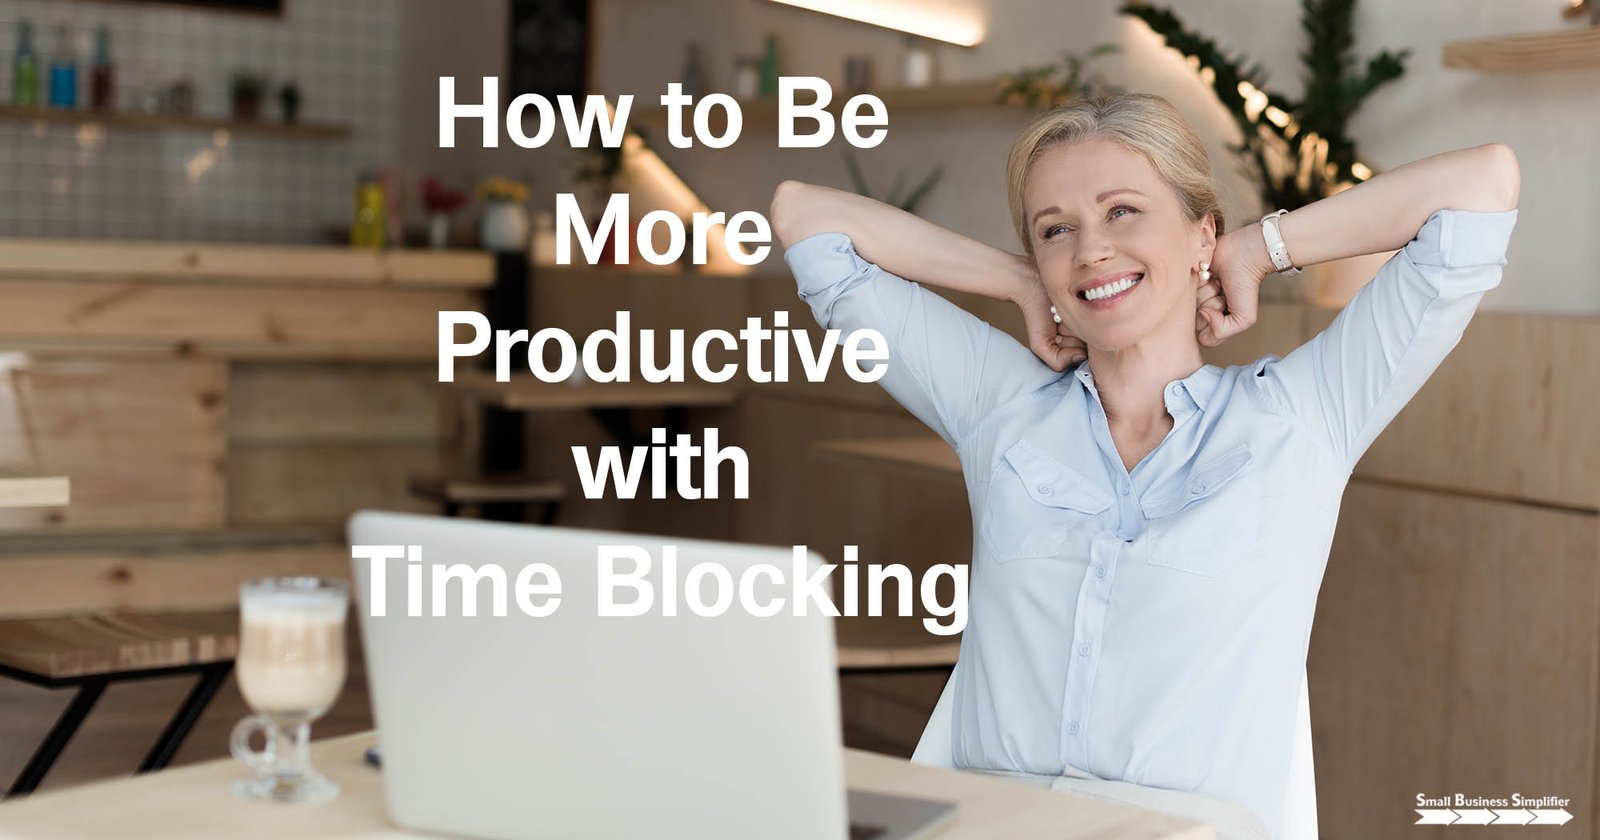 How to Be More Productive with Time Blocking